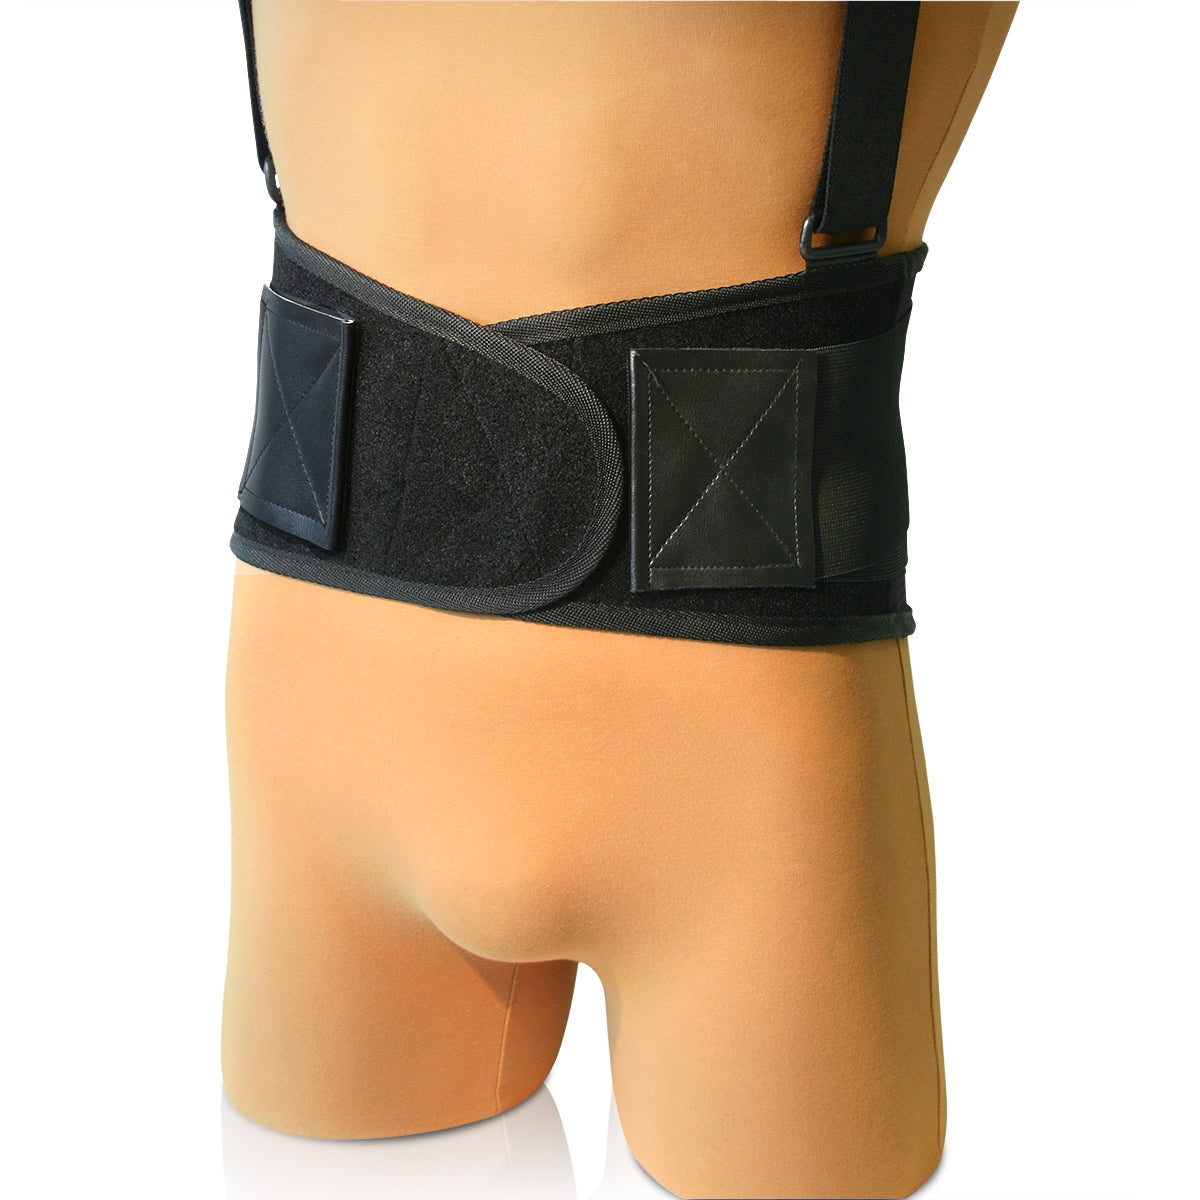 Deluxe Breathable Spandex Back Belt, 3XL